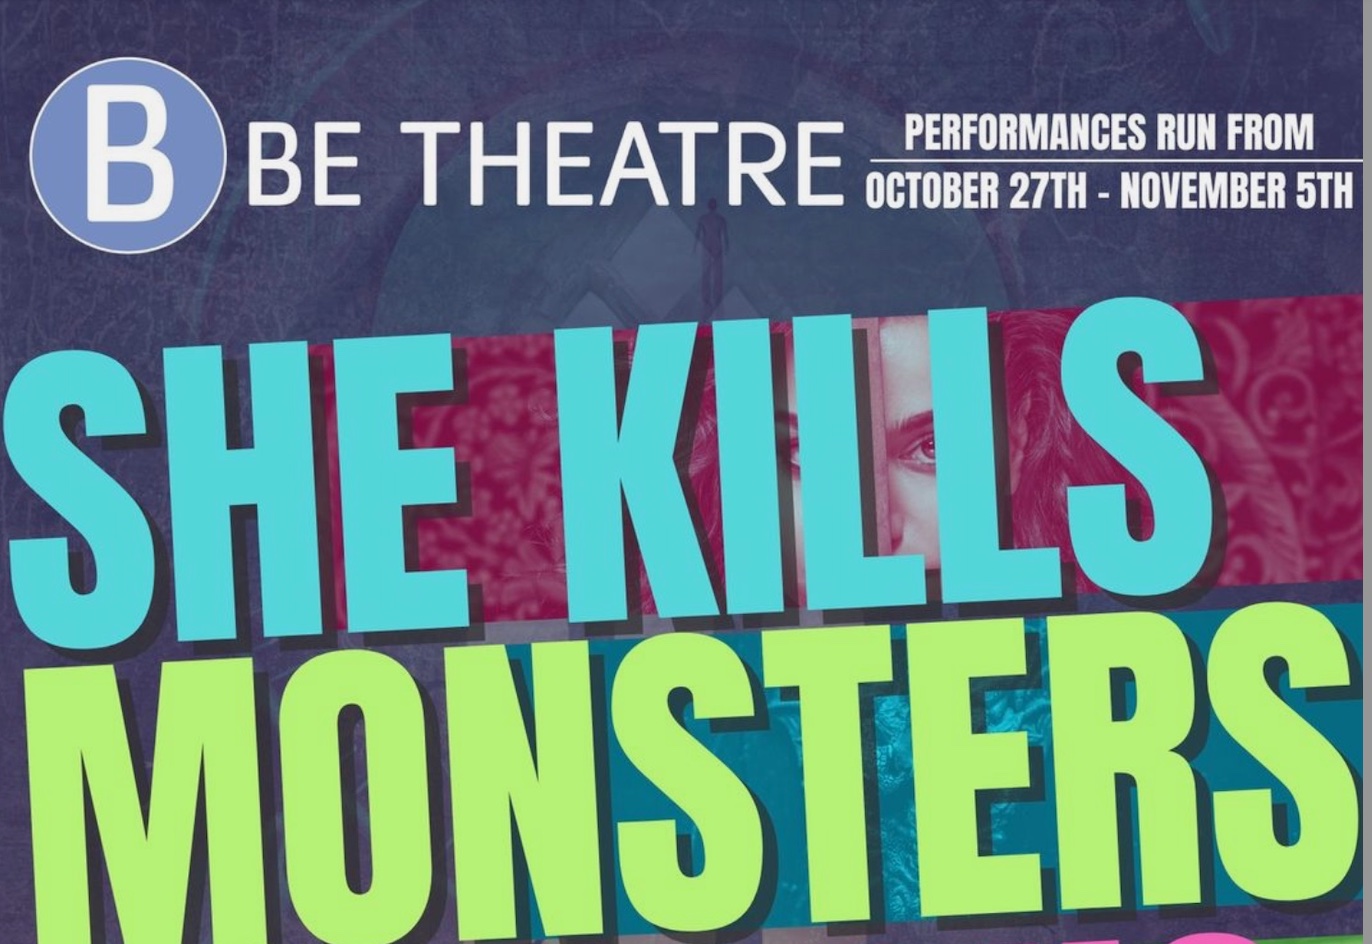 She Kills Monsters by BE Theatre